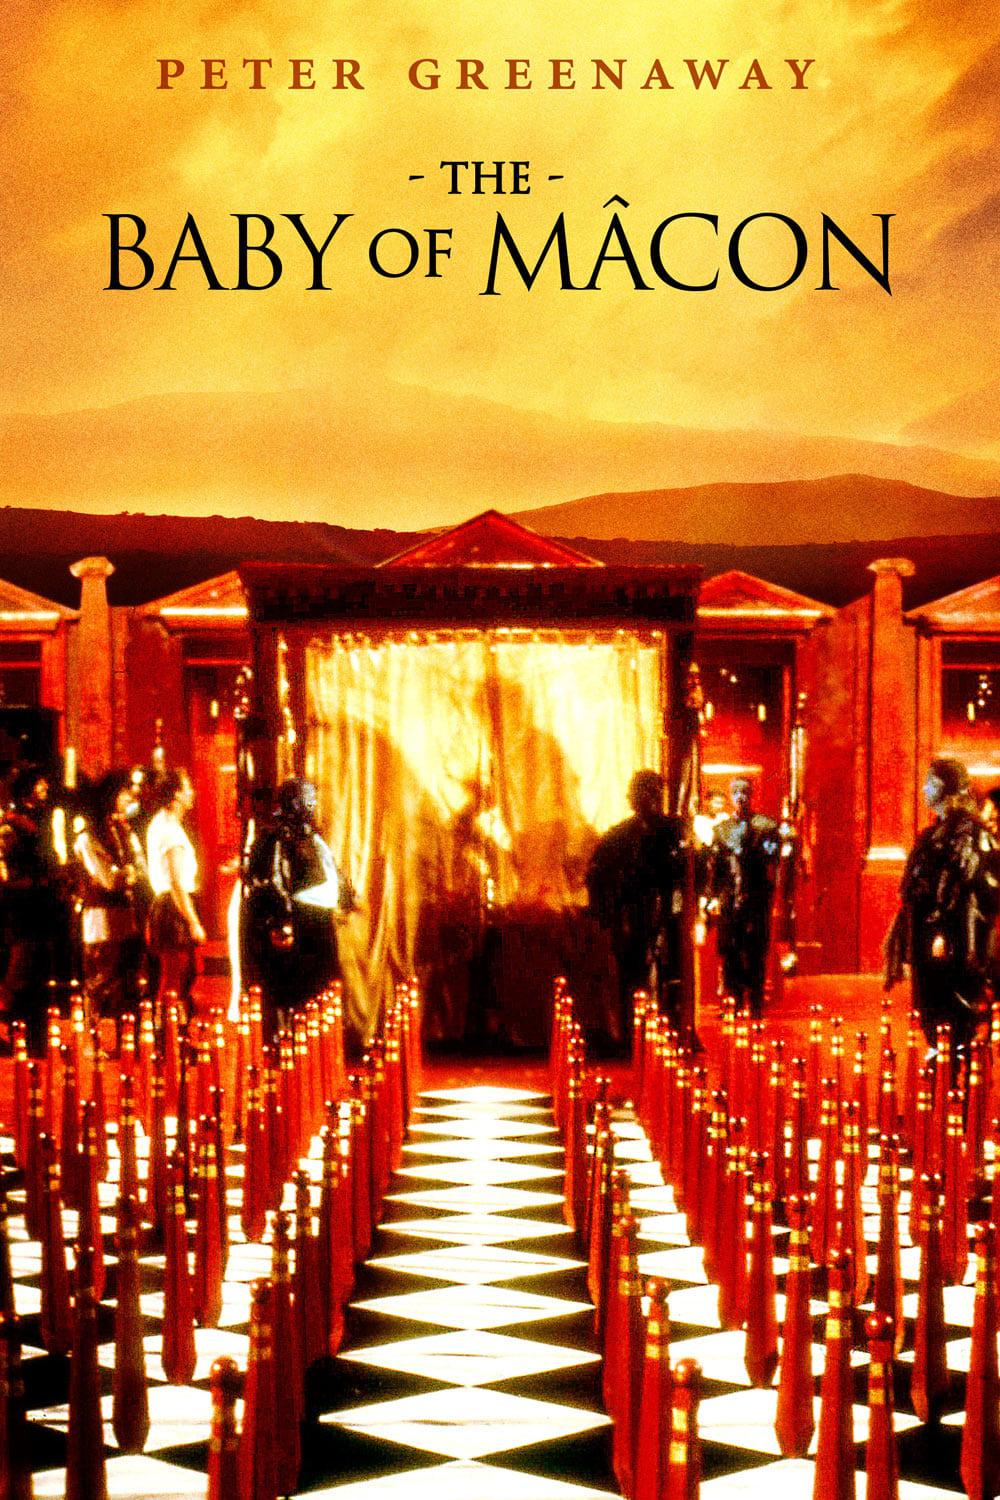 The Baby of Mâcon poster